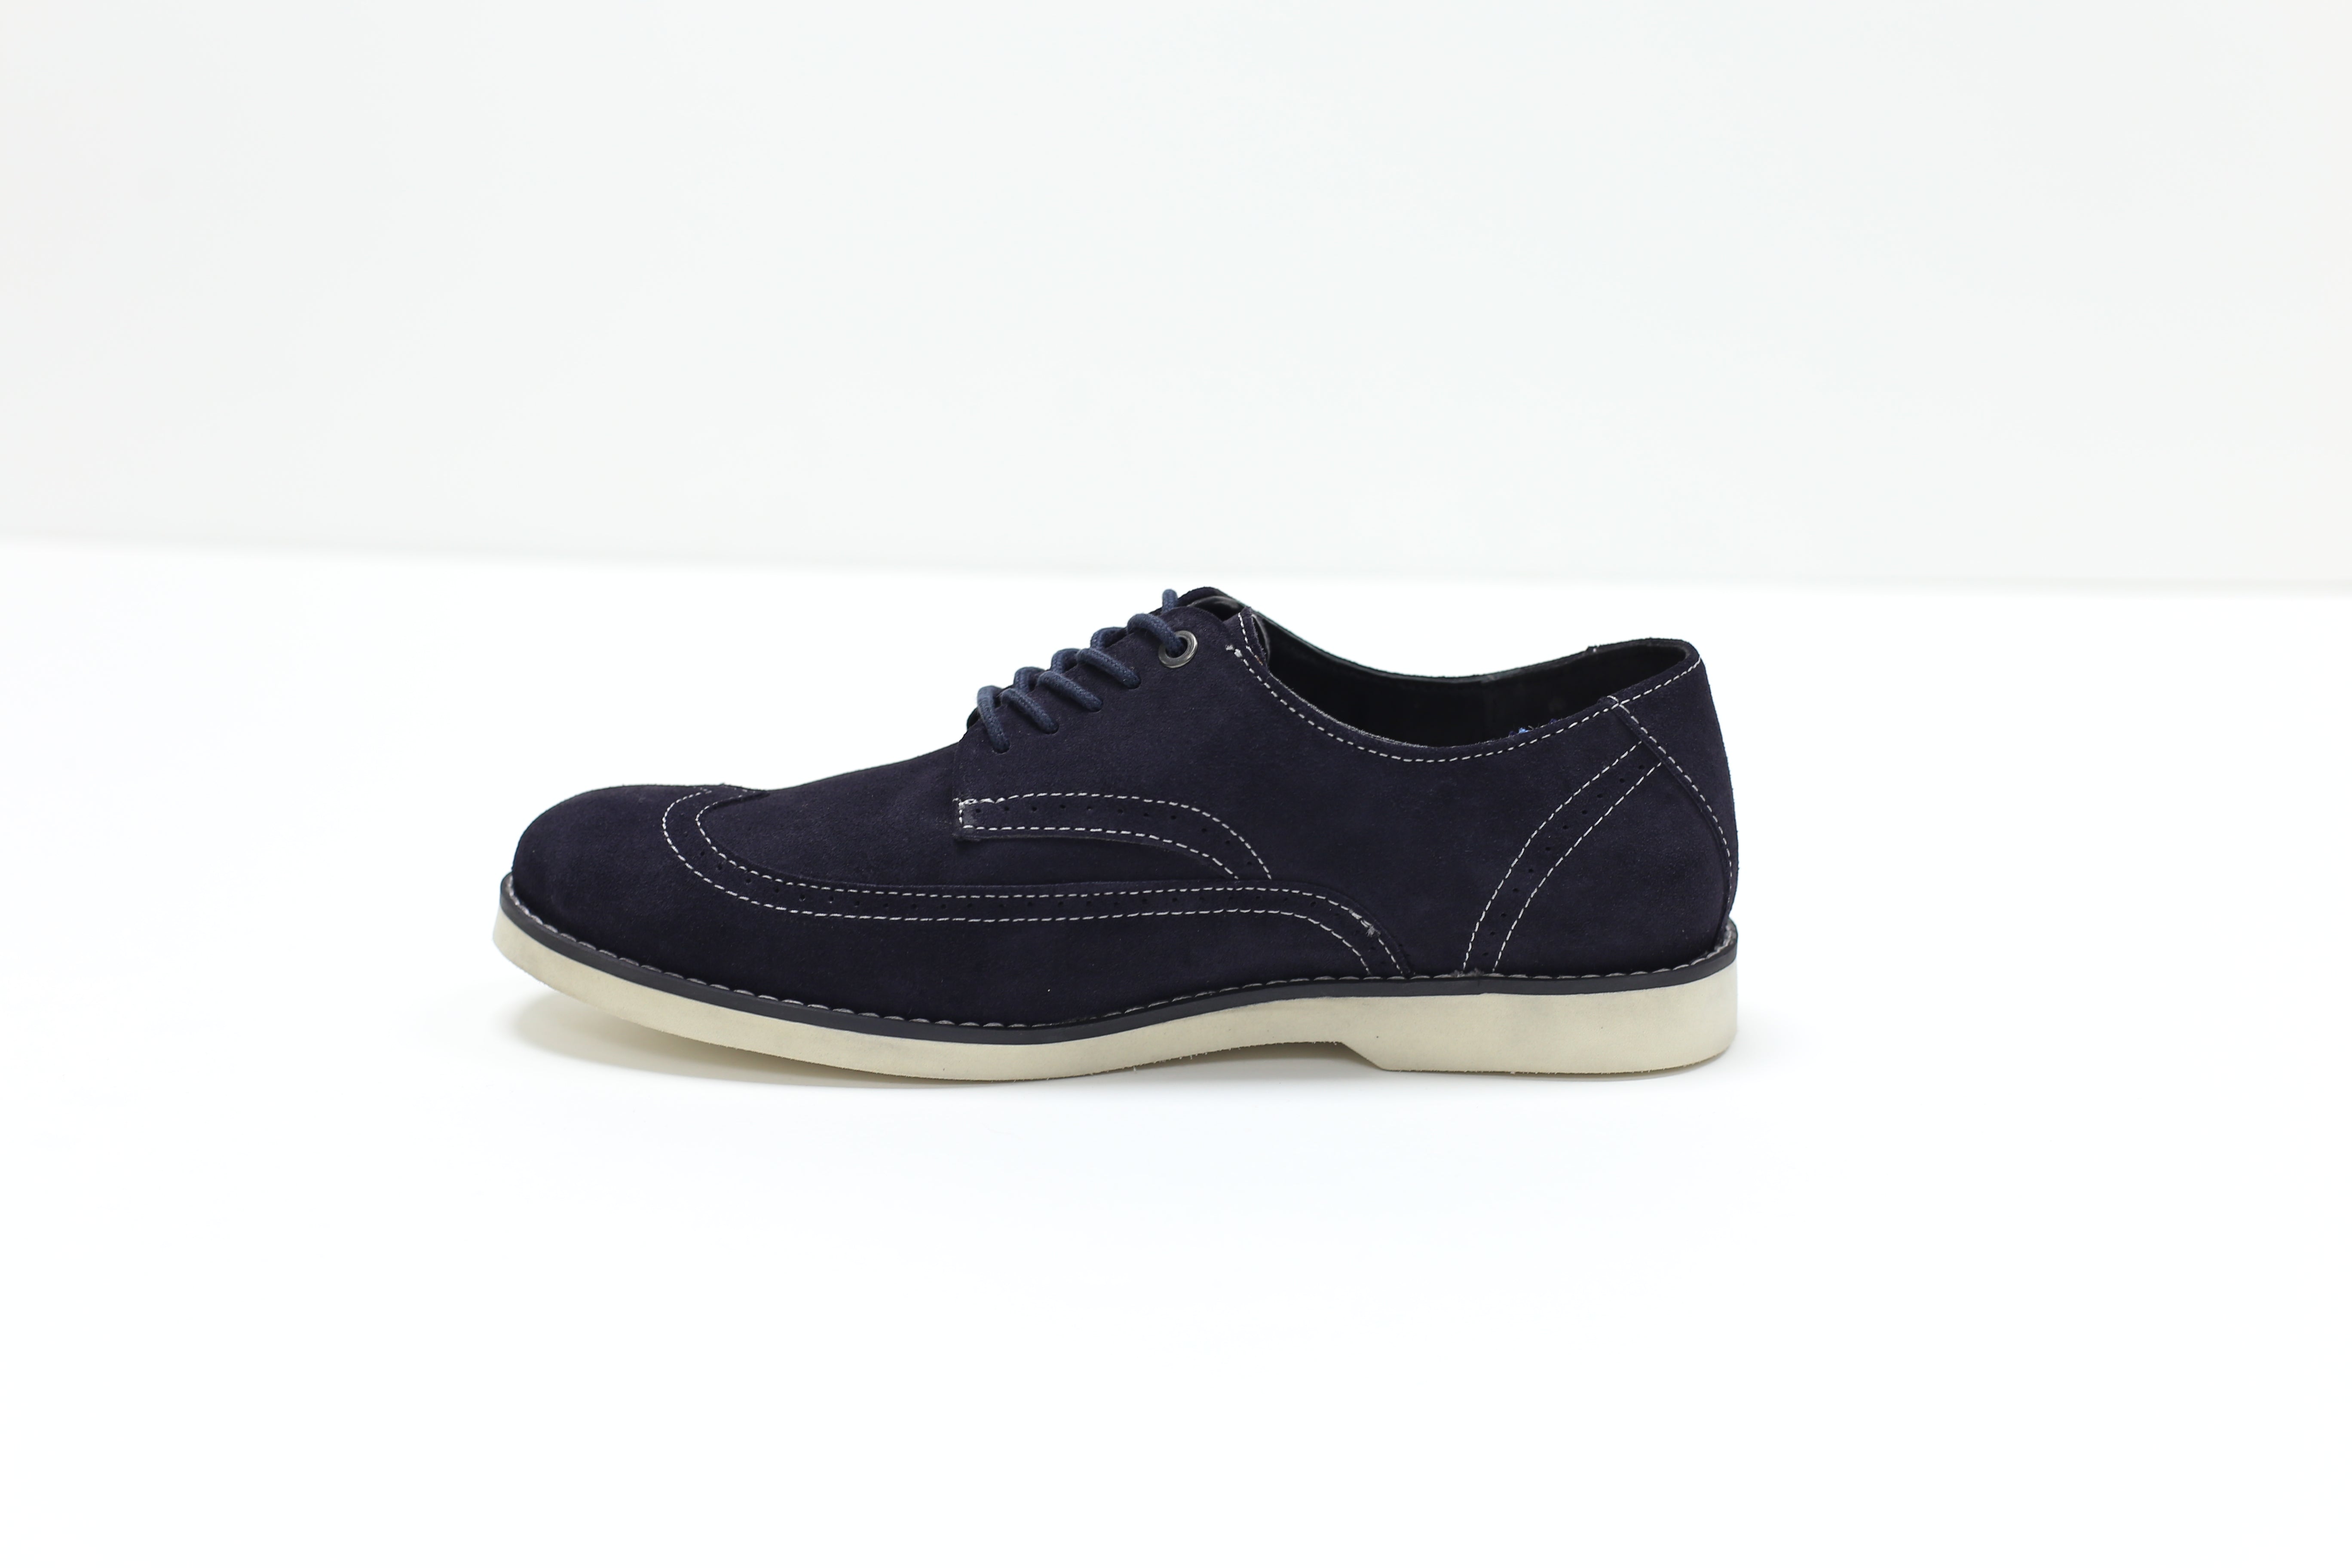 View Lesli Suede Leather Shoes In Navy information